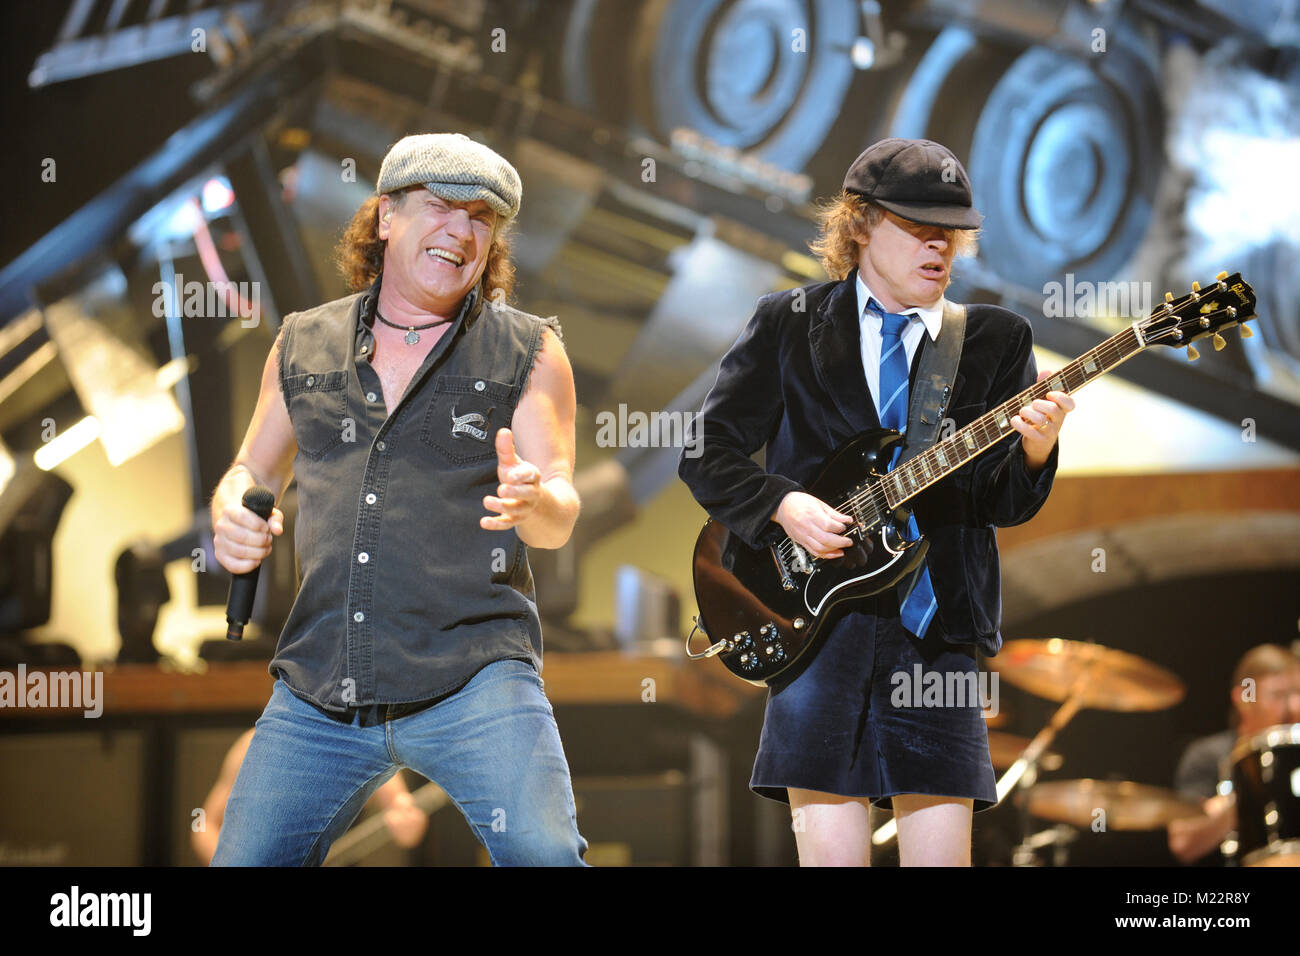 SUNRISE, FL - DECEMBER 20: Brian Johnson, Angus Young of AC/DC perform at the Bank Atlantic center on December 20, 2008 in Sunrise Florida.  People:  Brian Johnson, Angus Young Stock Photo